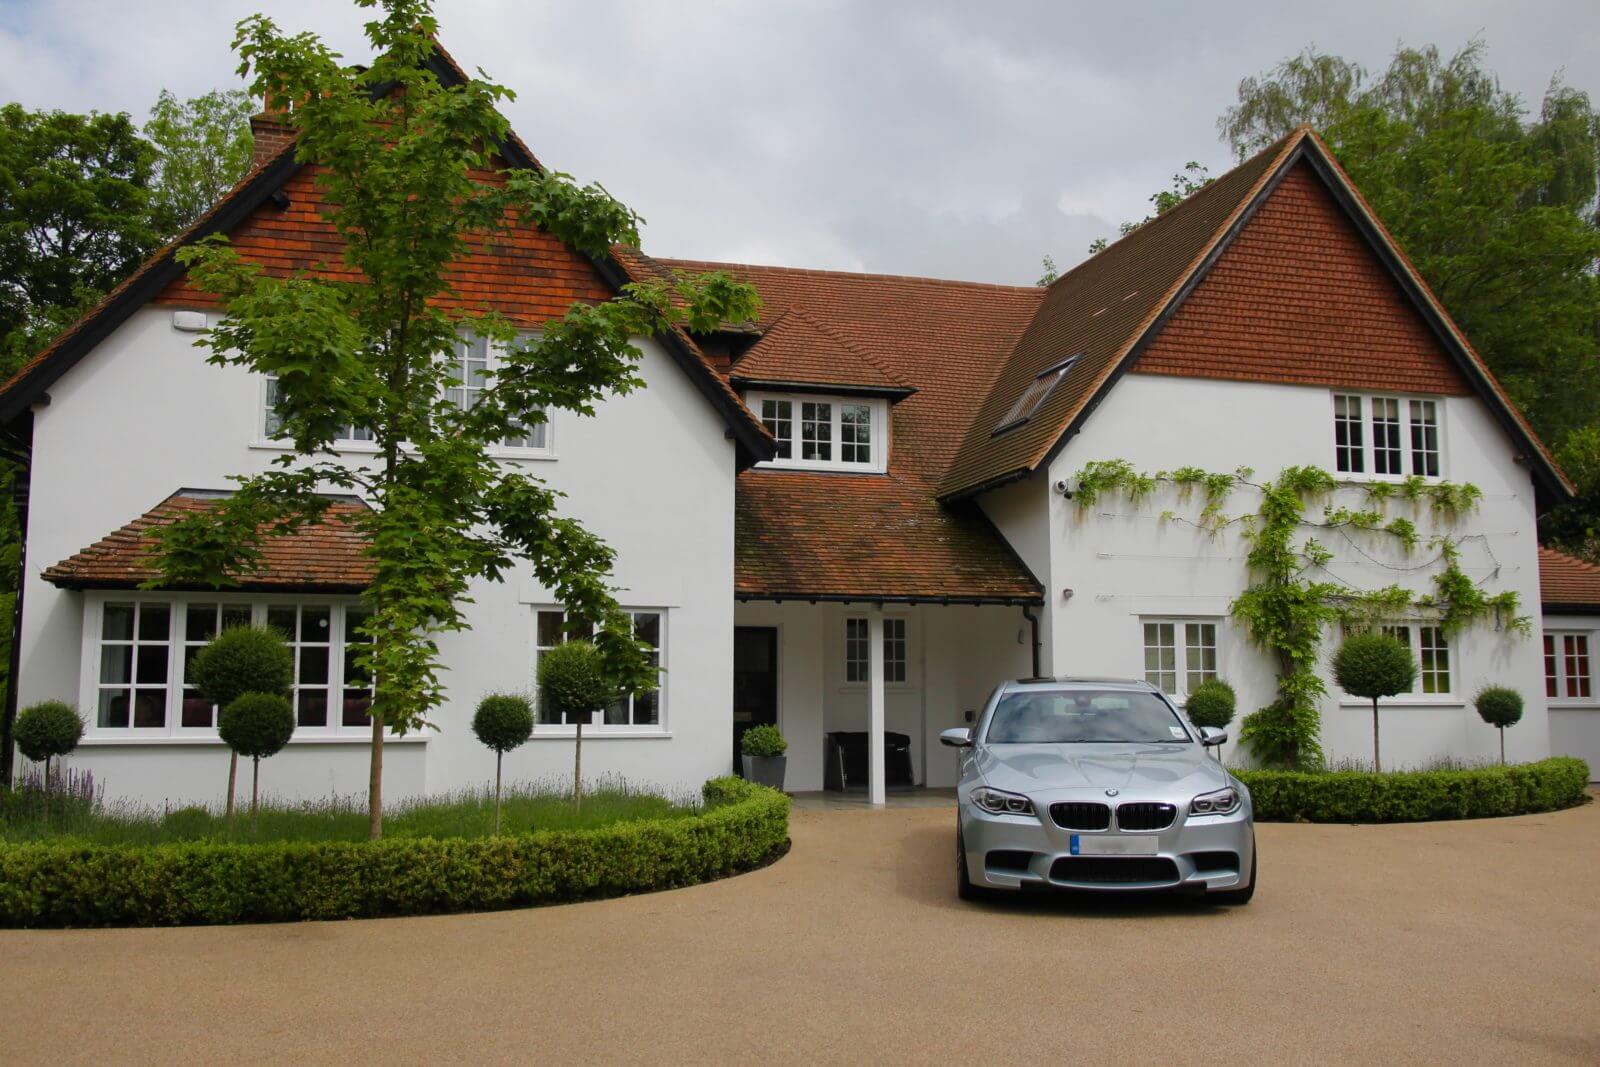 Silver BMW sitting on the driveway of detached property with topiary